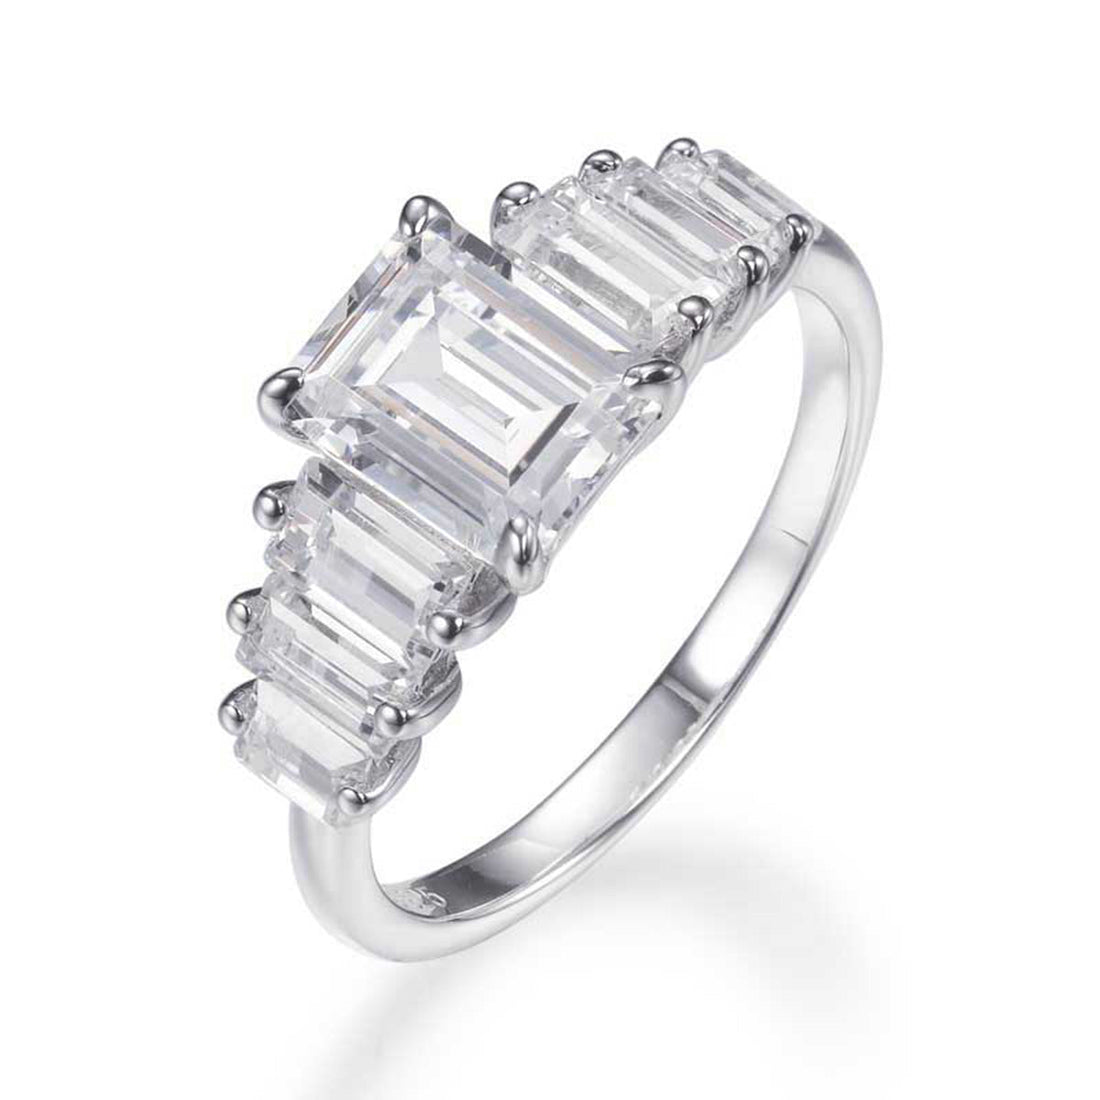 7.00ct Emerald Cut Cubic Zirconia Tapered Ring in Rhodium Plated Silver